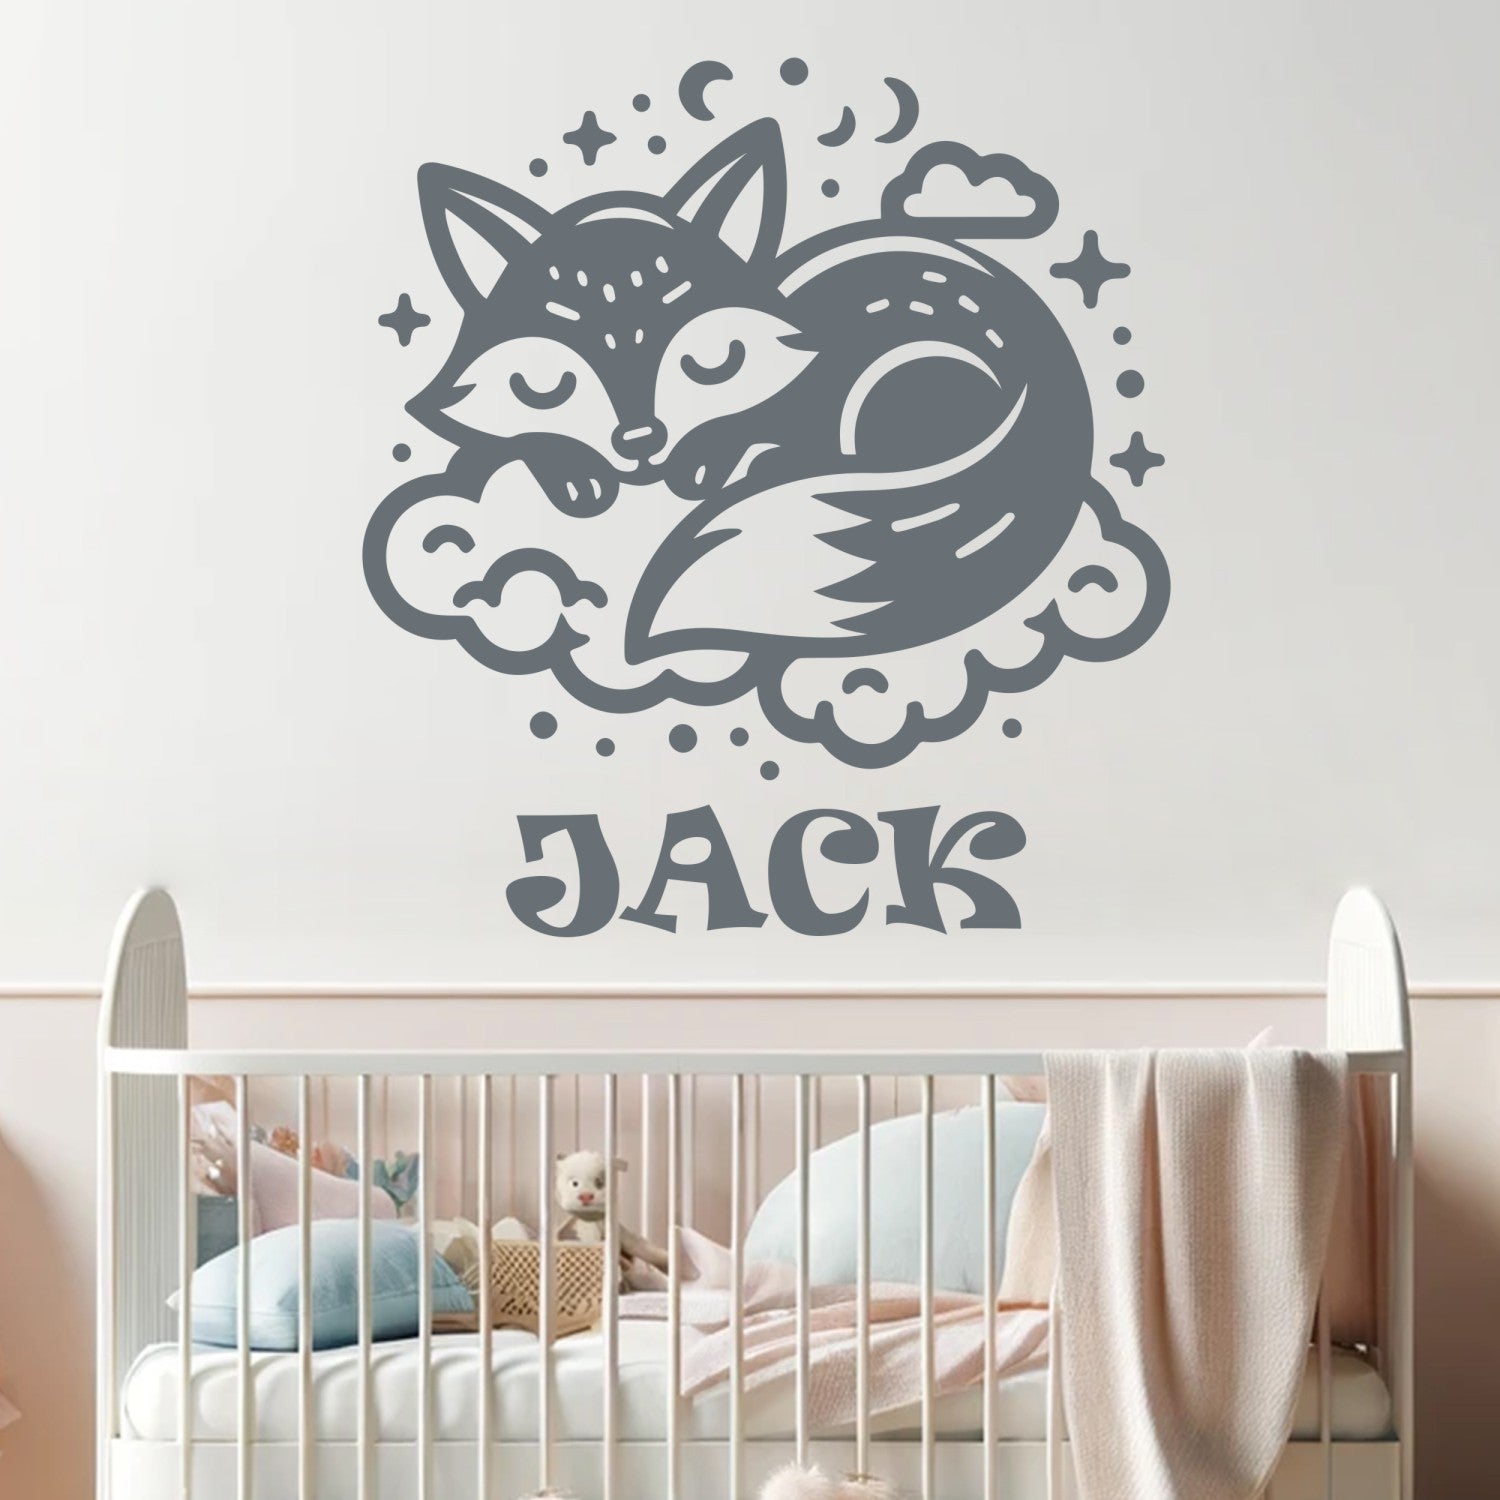 Fox Wall Stickers for Nursery - Personalized Name Stickers for Baby Room - Name Customized Wall Decor - Animal Wall Decals